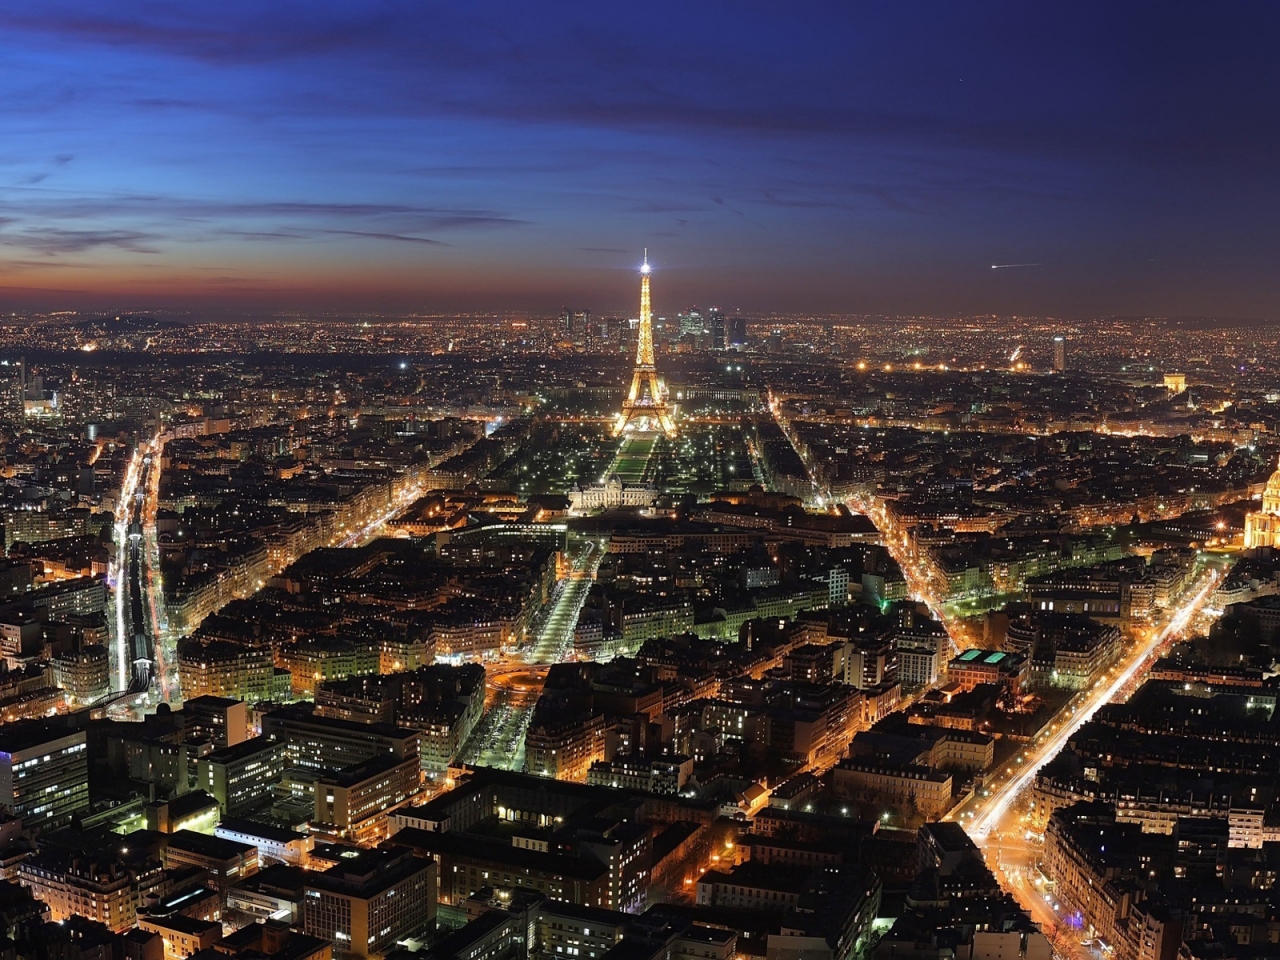 Paris seen at night for 1280 x 960 resolution